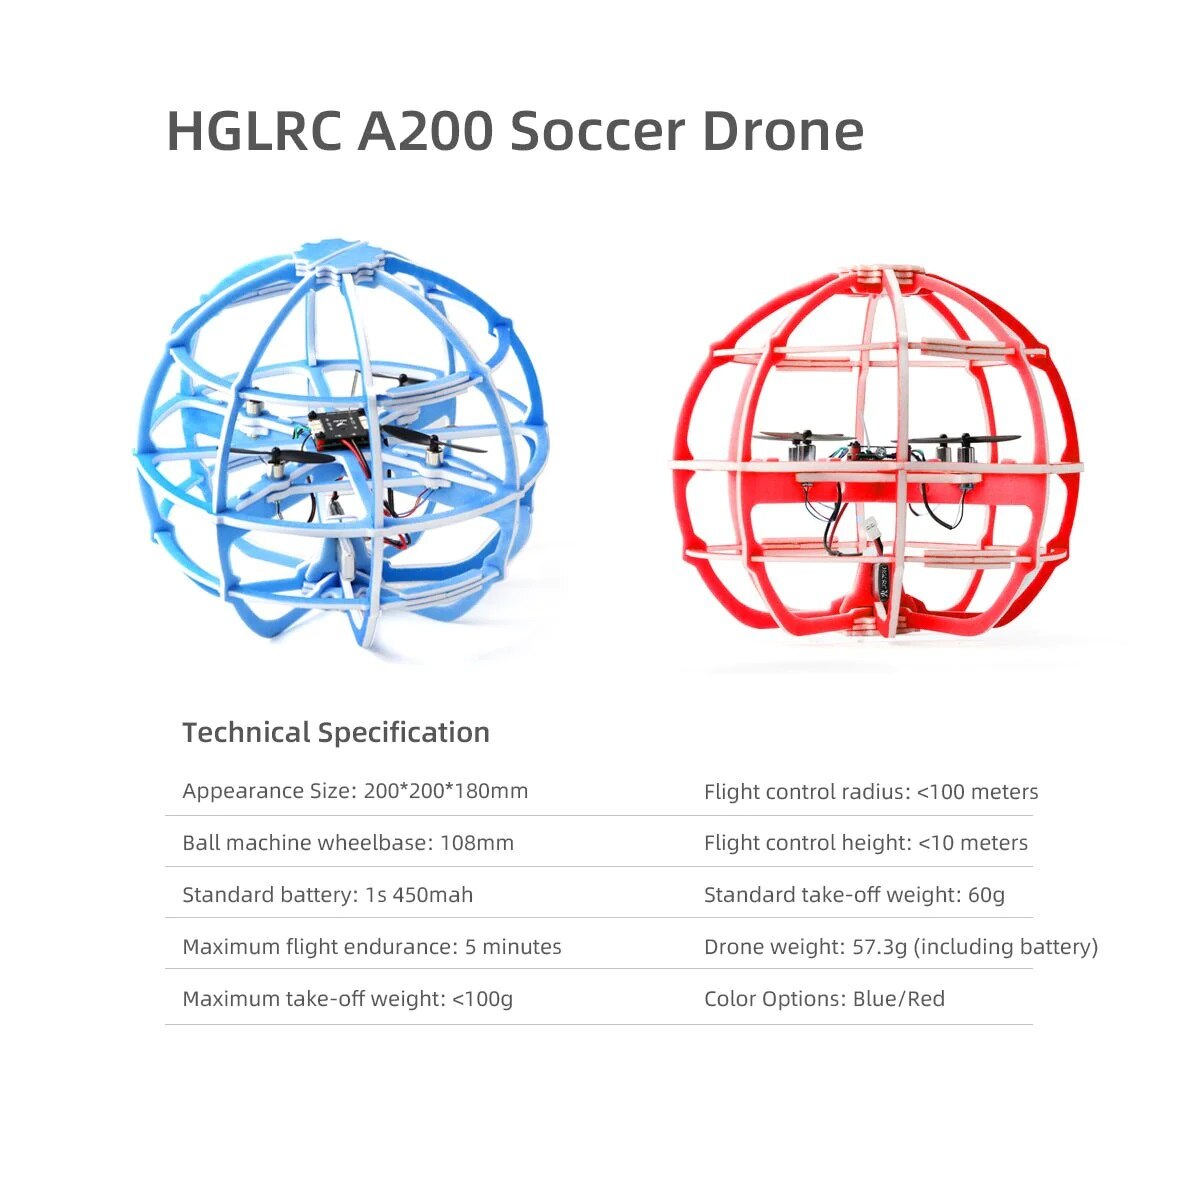 HGLRC A200 Soccer Ball Drone, HGLRC A200 Soccer Drone Technical Specification Appearance Size: 200*200